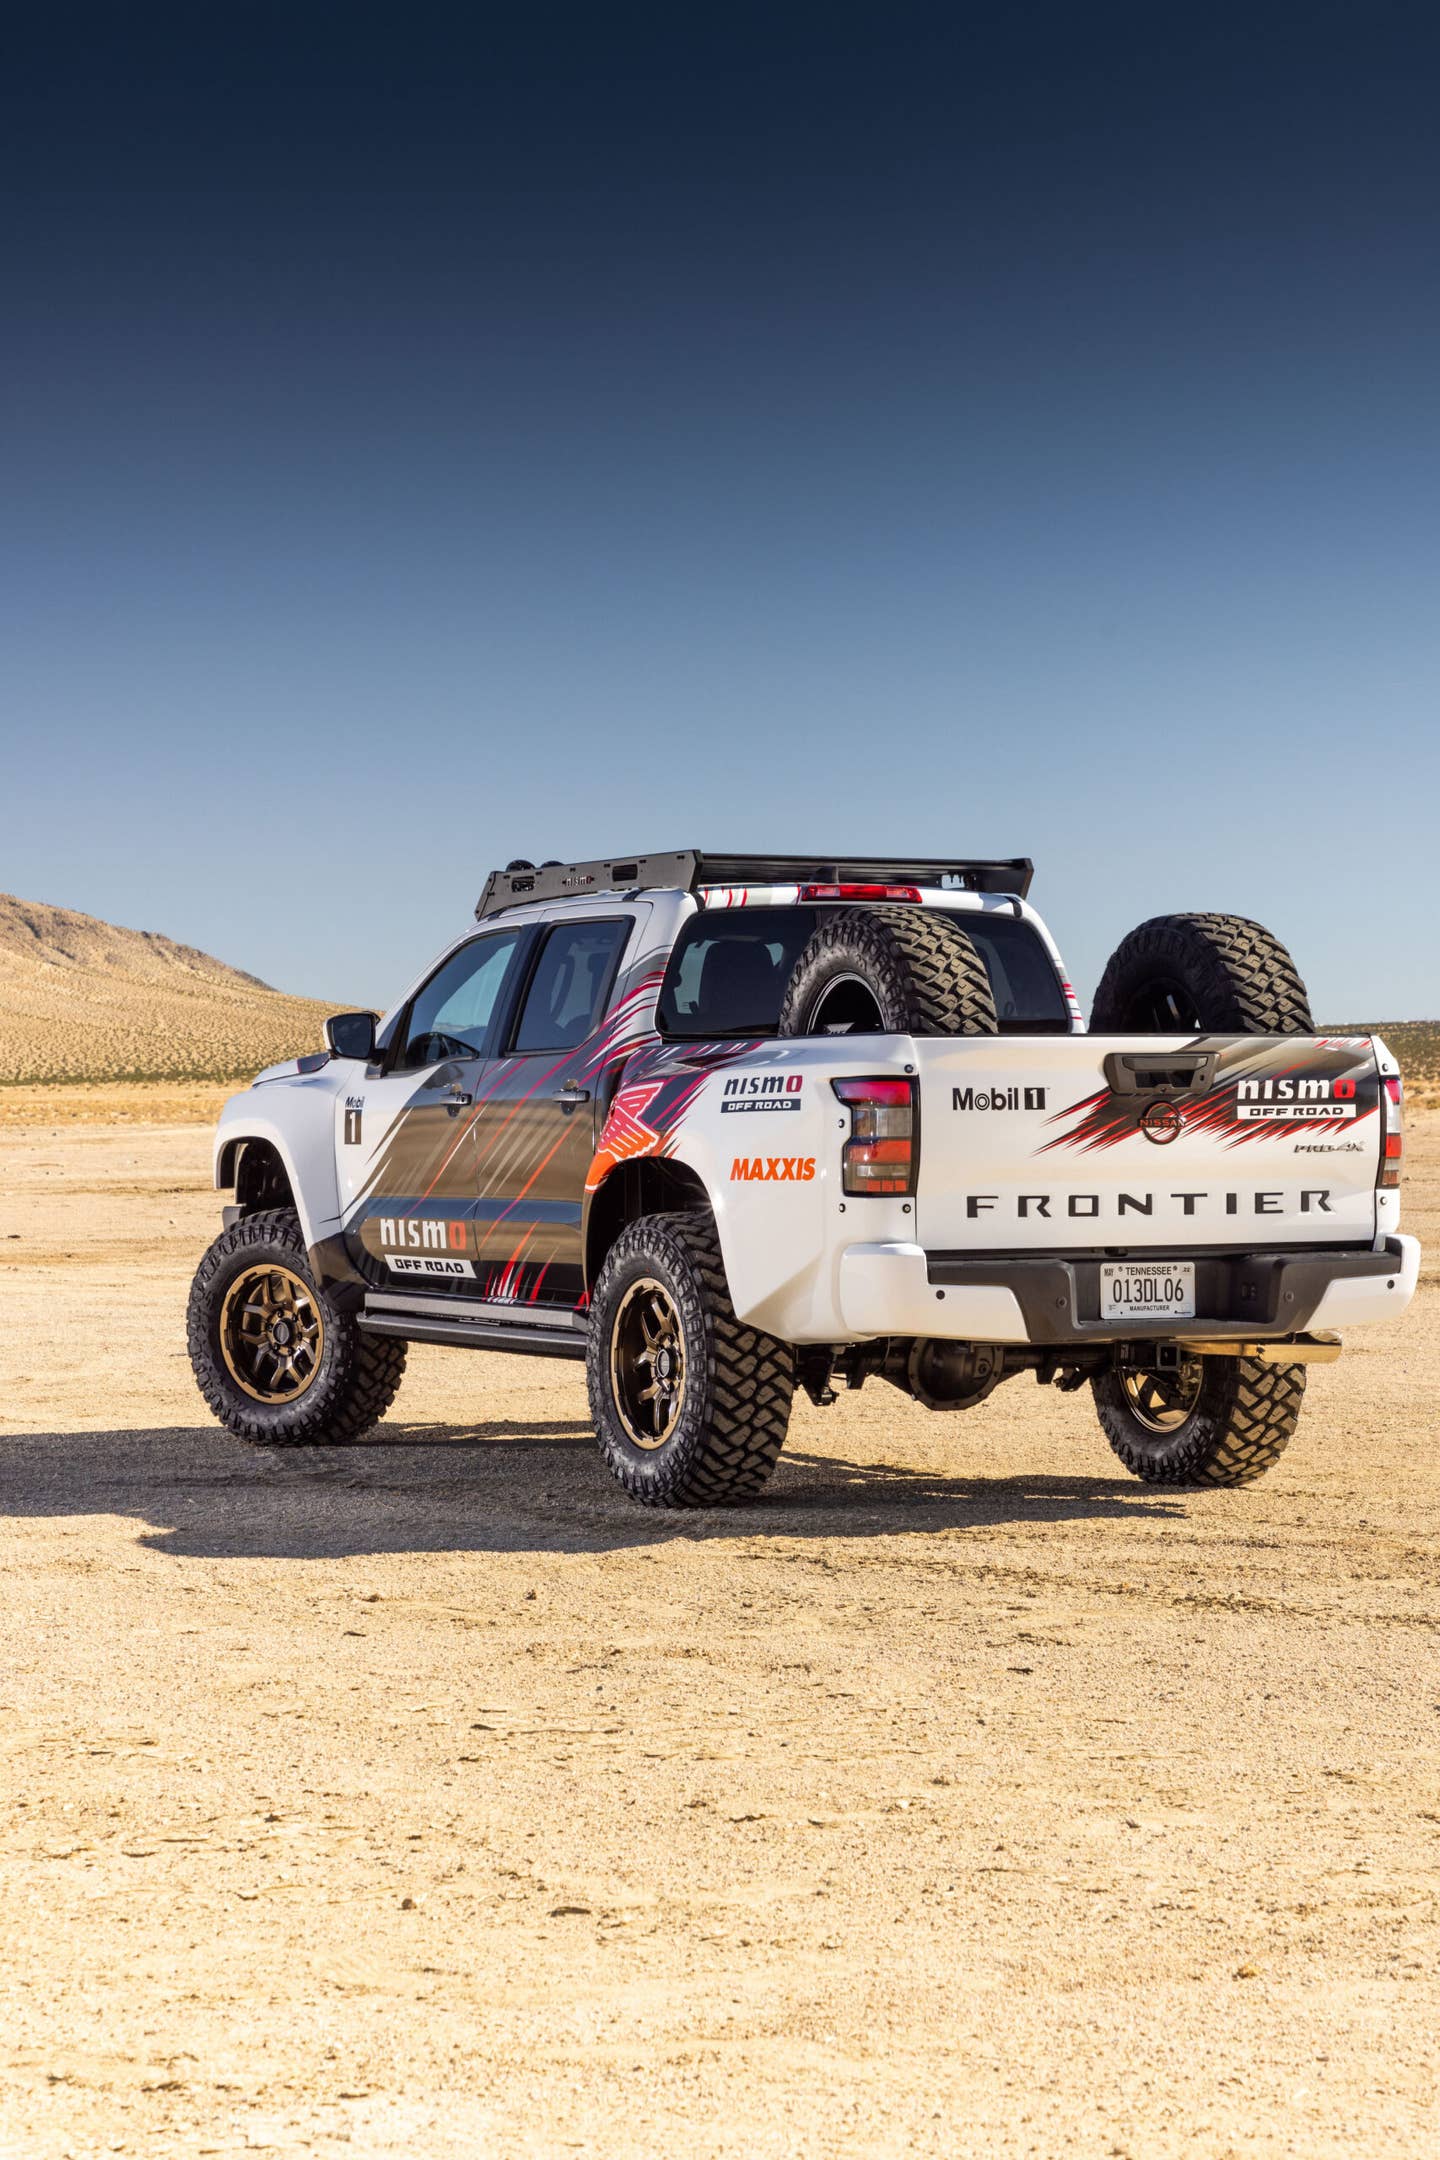 The NISMO Off Road Frontier V8 concept takes the midsize truck to a new level of performance with a V8 engine, wide-track suspension, wide-body kit, new NISMO Off Road accessories and prototype NISMO Off Road parts.